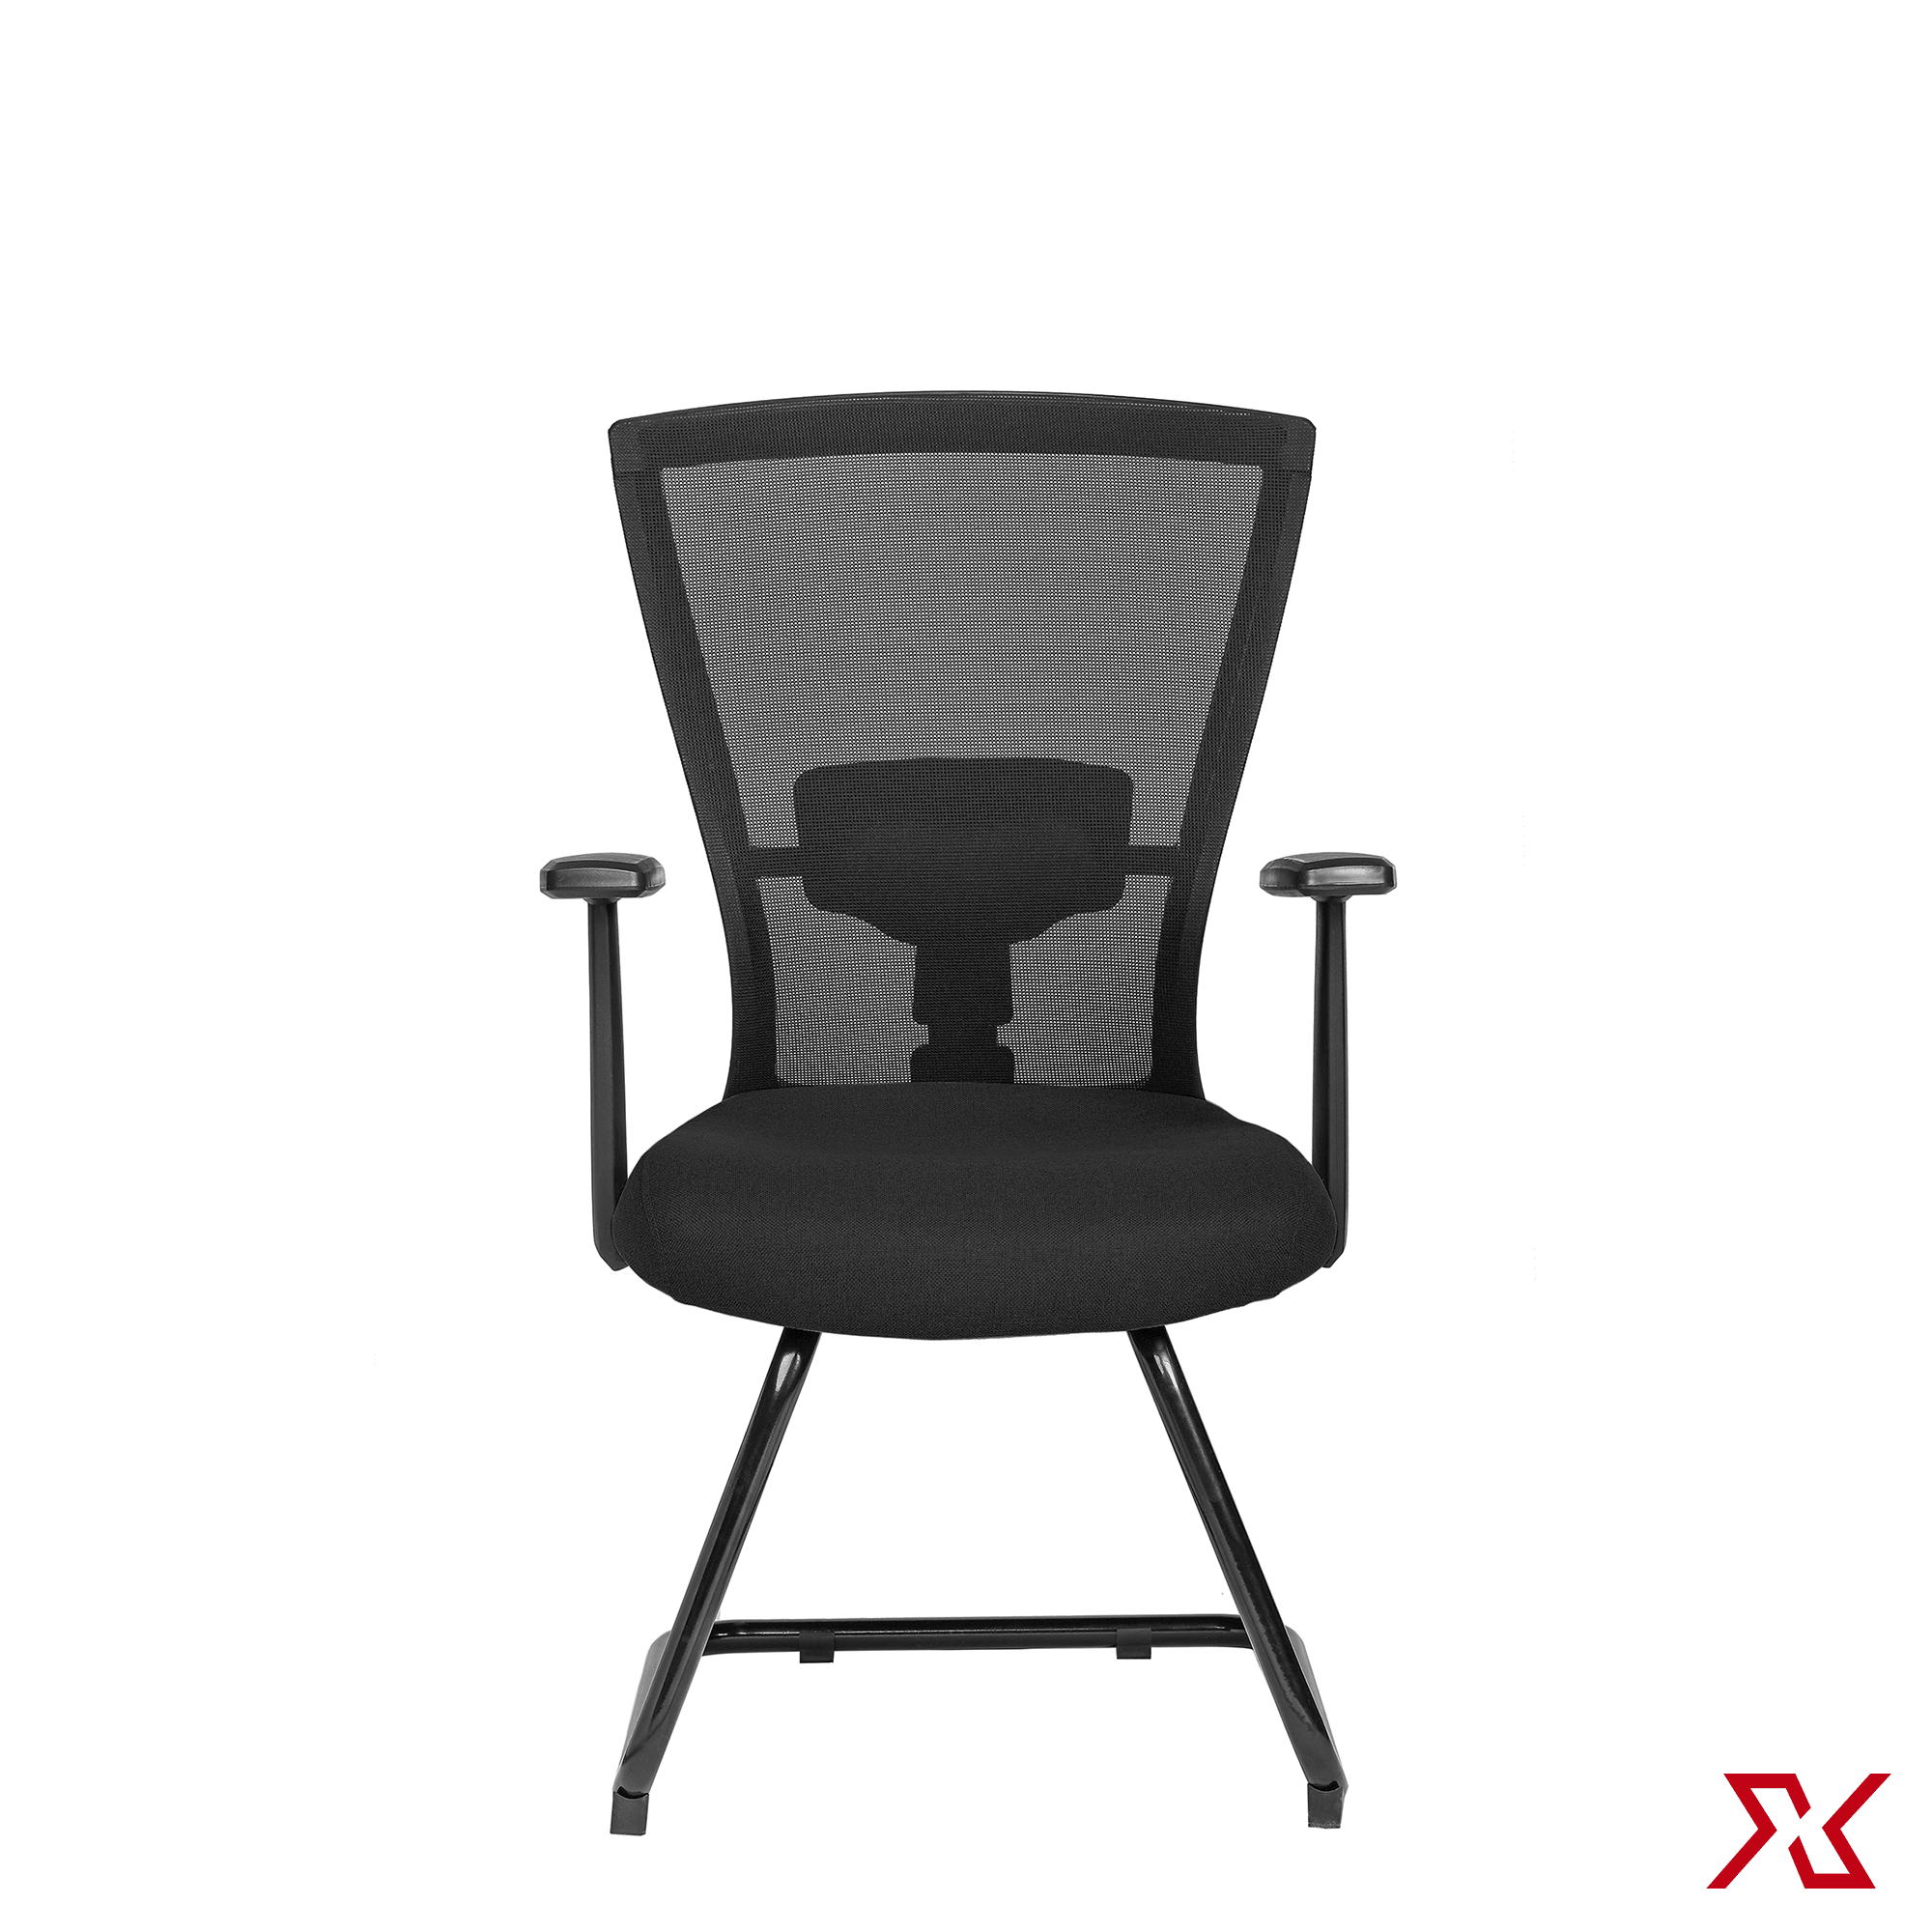 ZINC Medium Back Visitor (Black Chair) - Exclusiff Seating Sytems